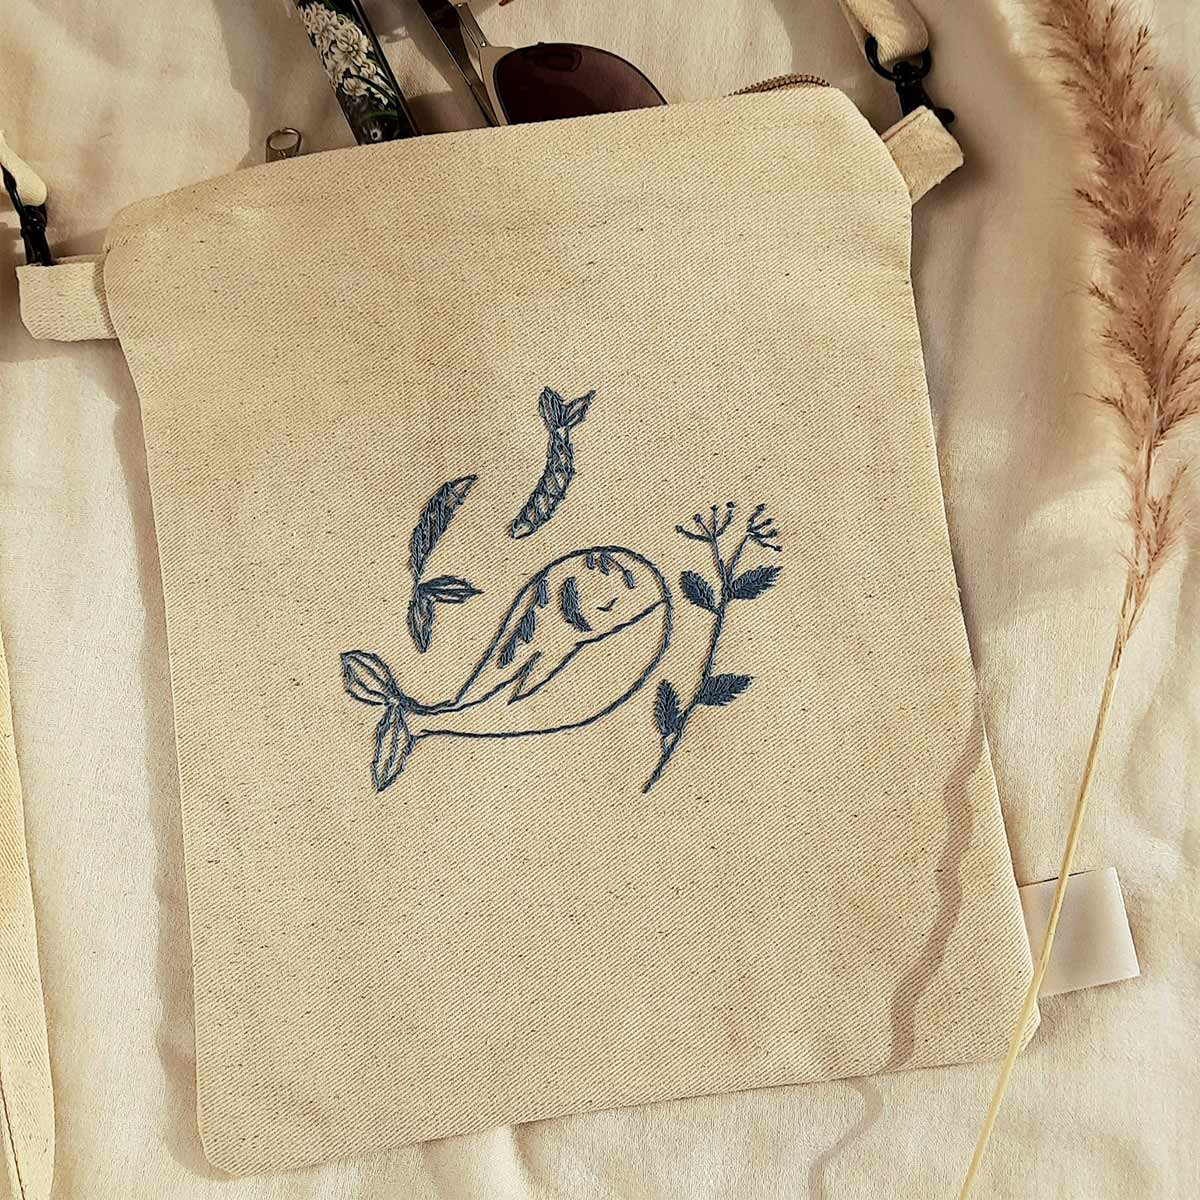 'OH Whale' Sling Bag